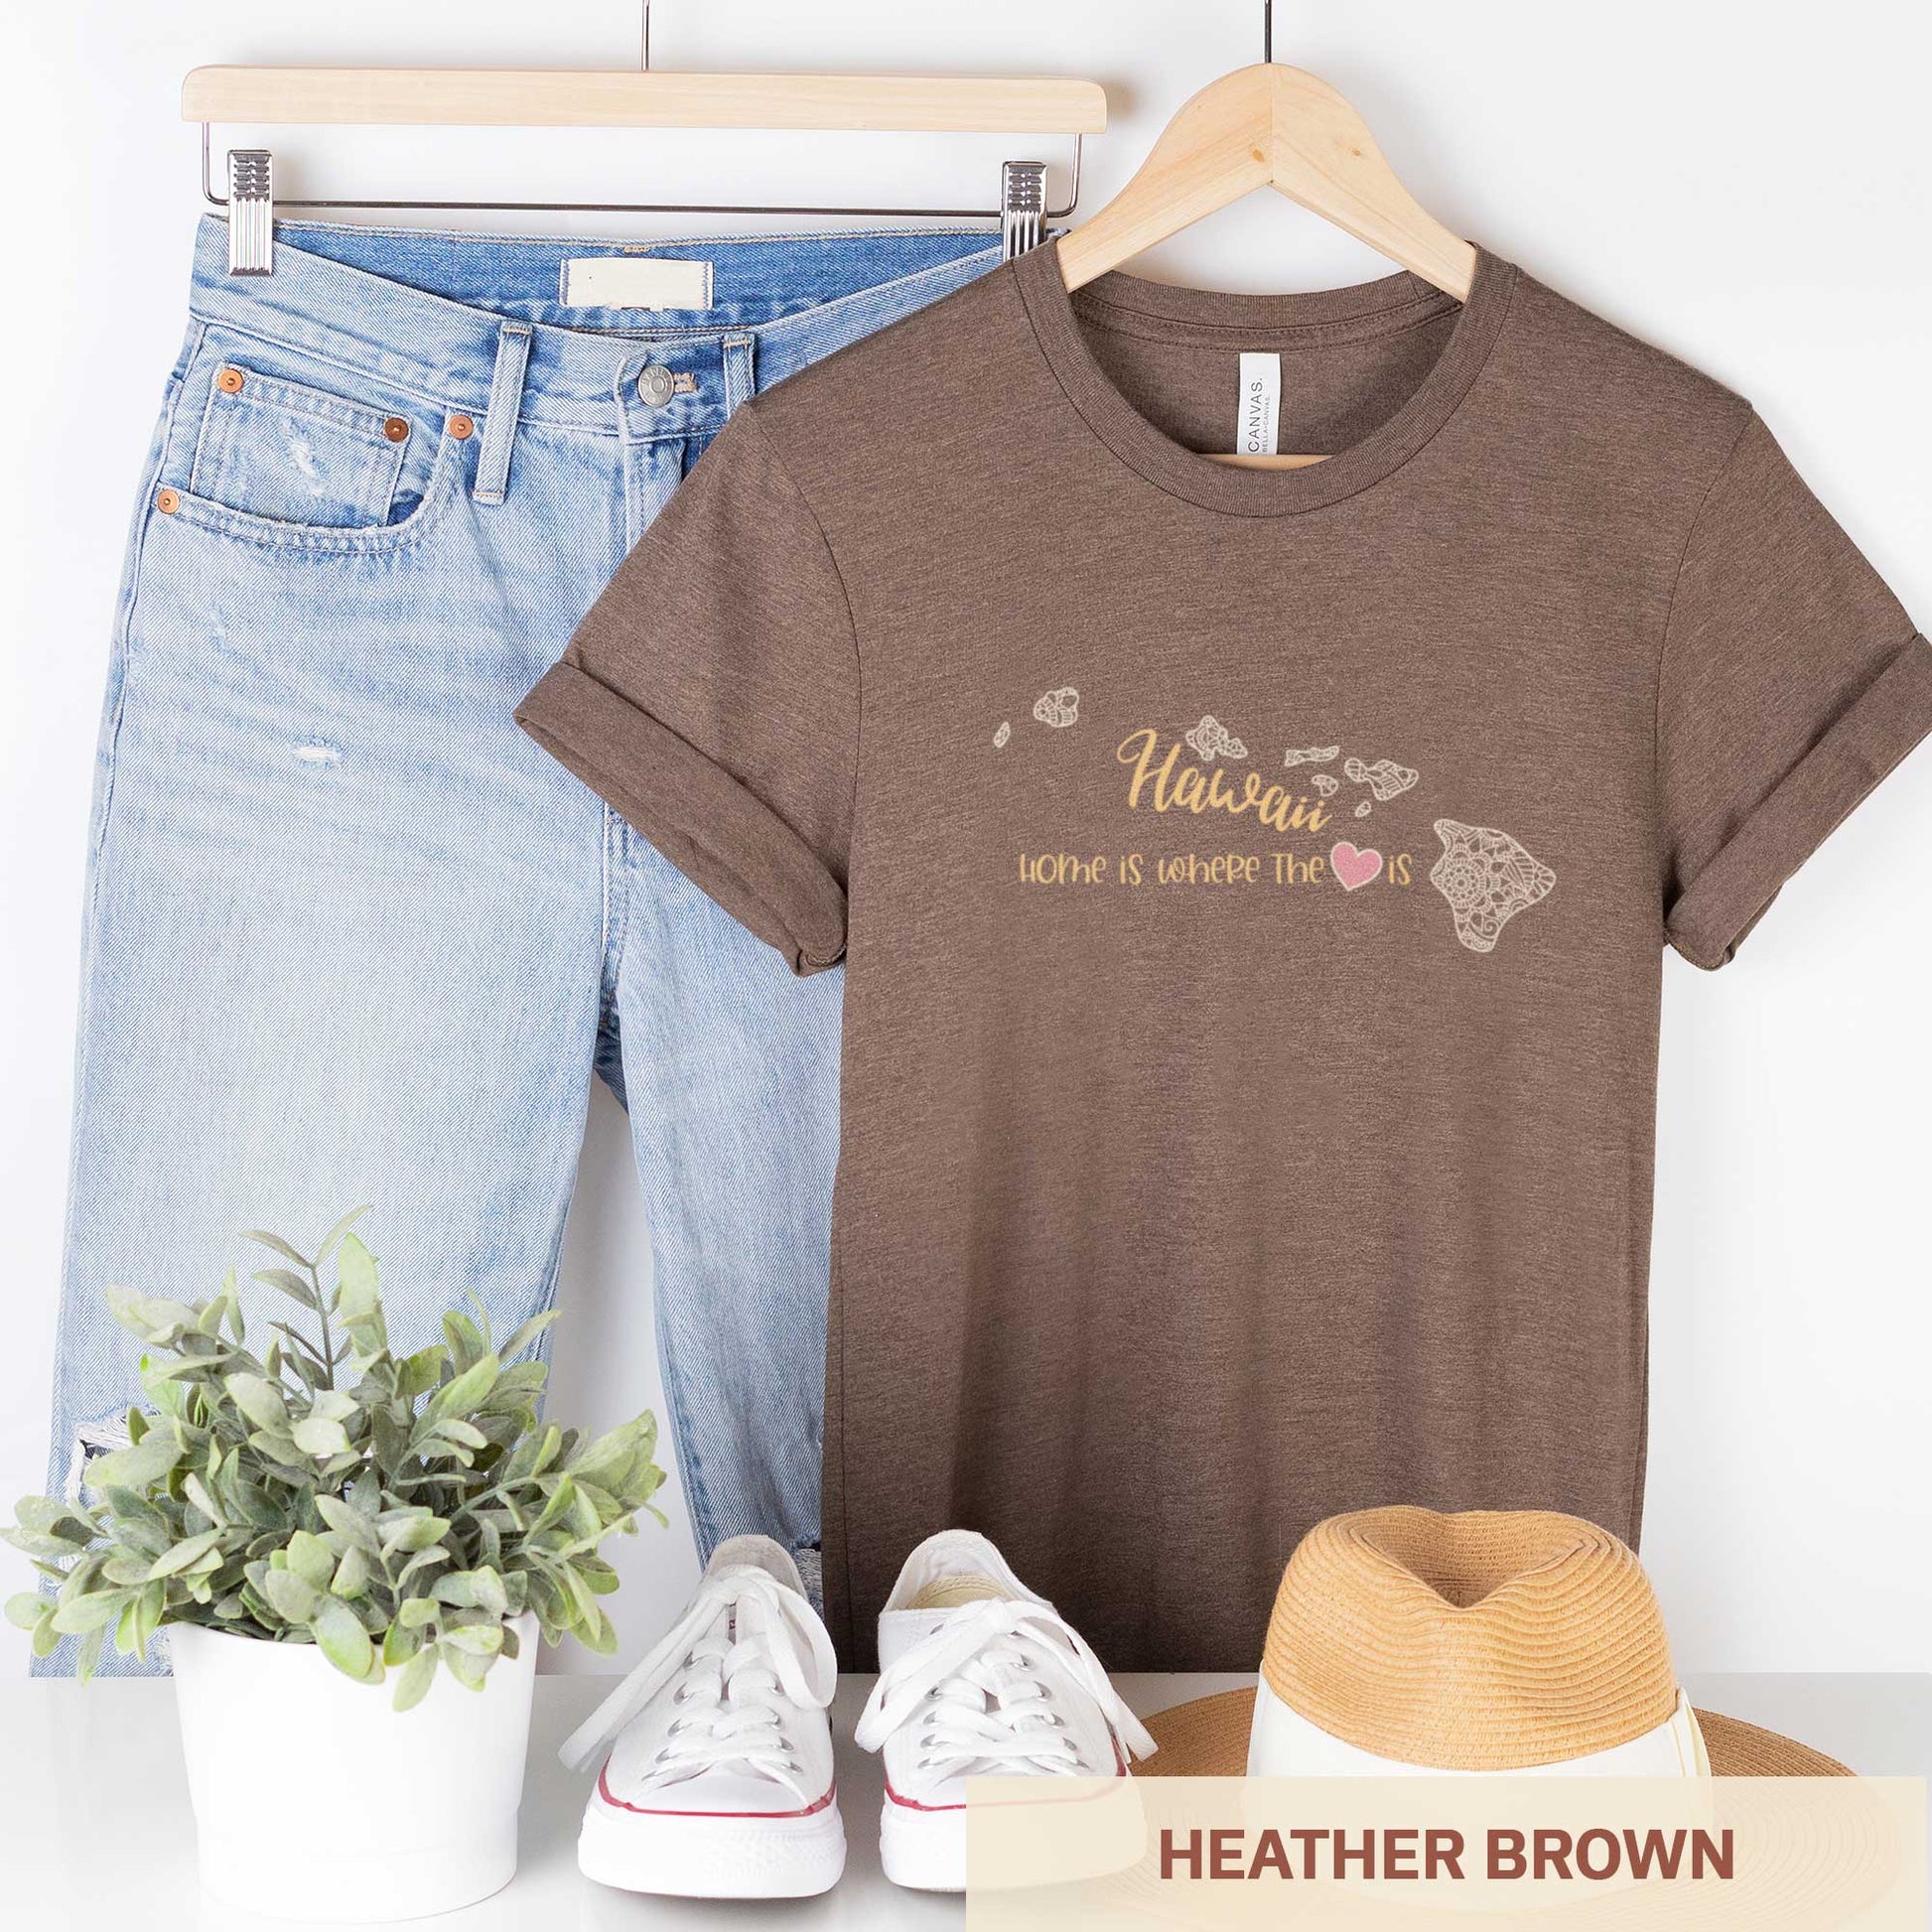 A hanging heather brown Bella Canvas t-shirt featuring a mandala in the shape of Hawaii with the words home is where the heart is.